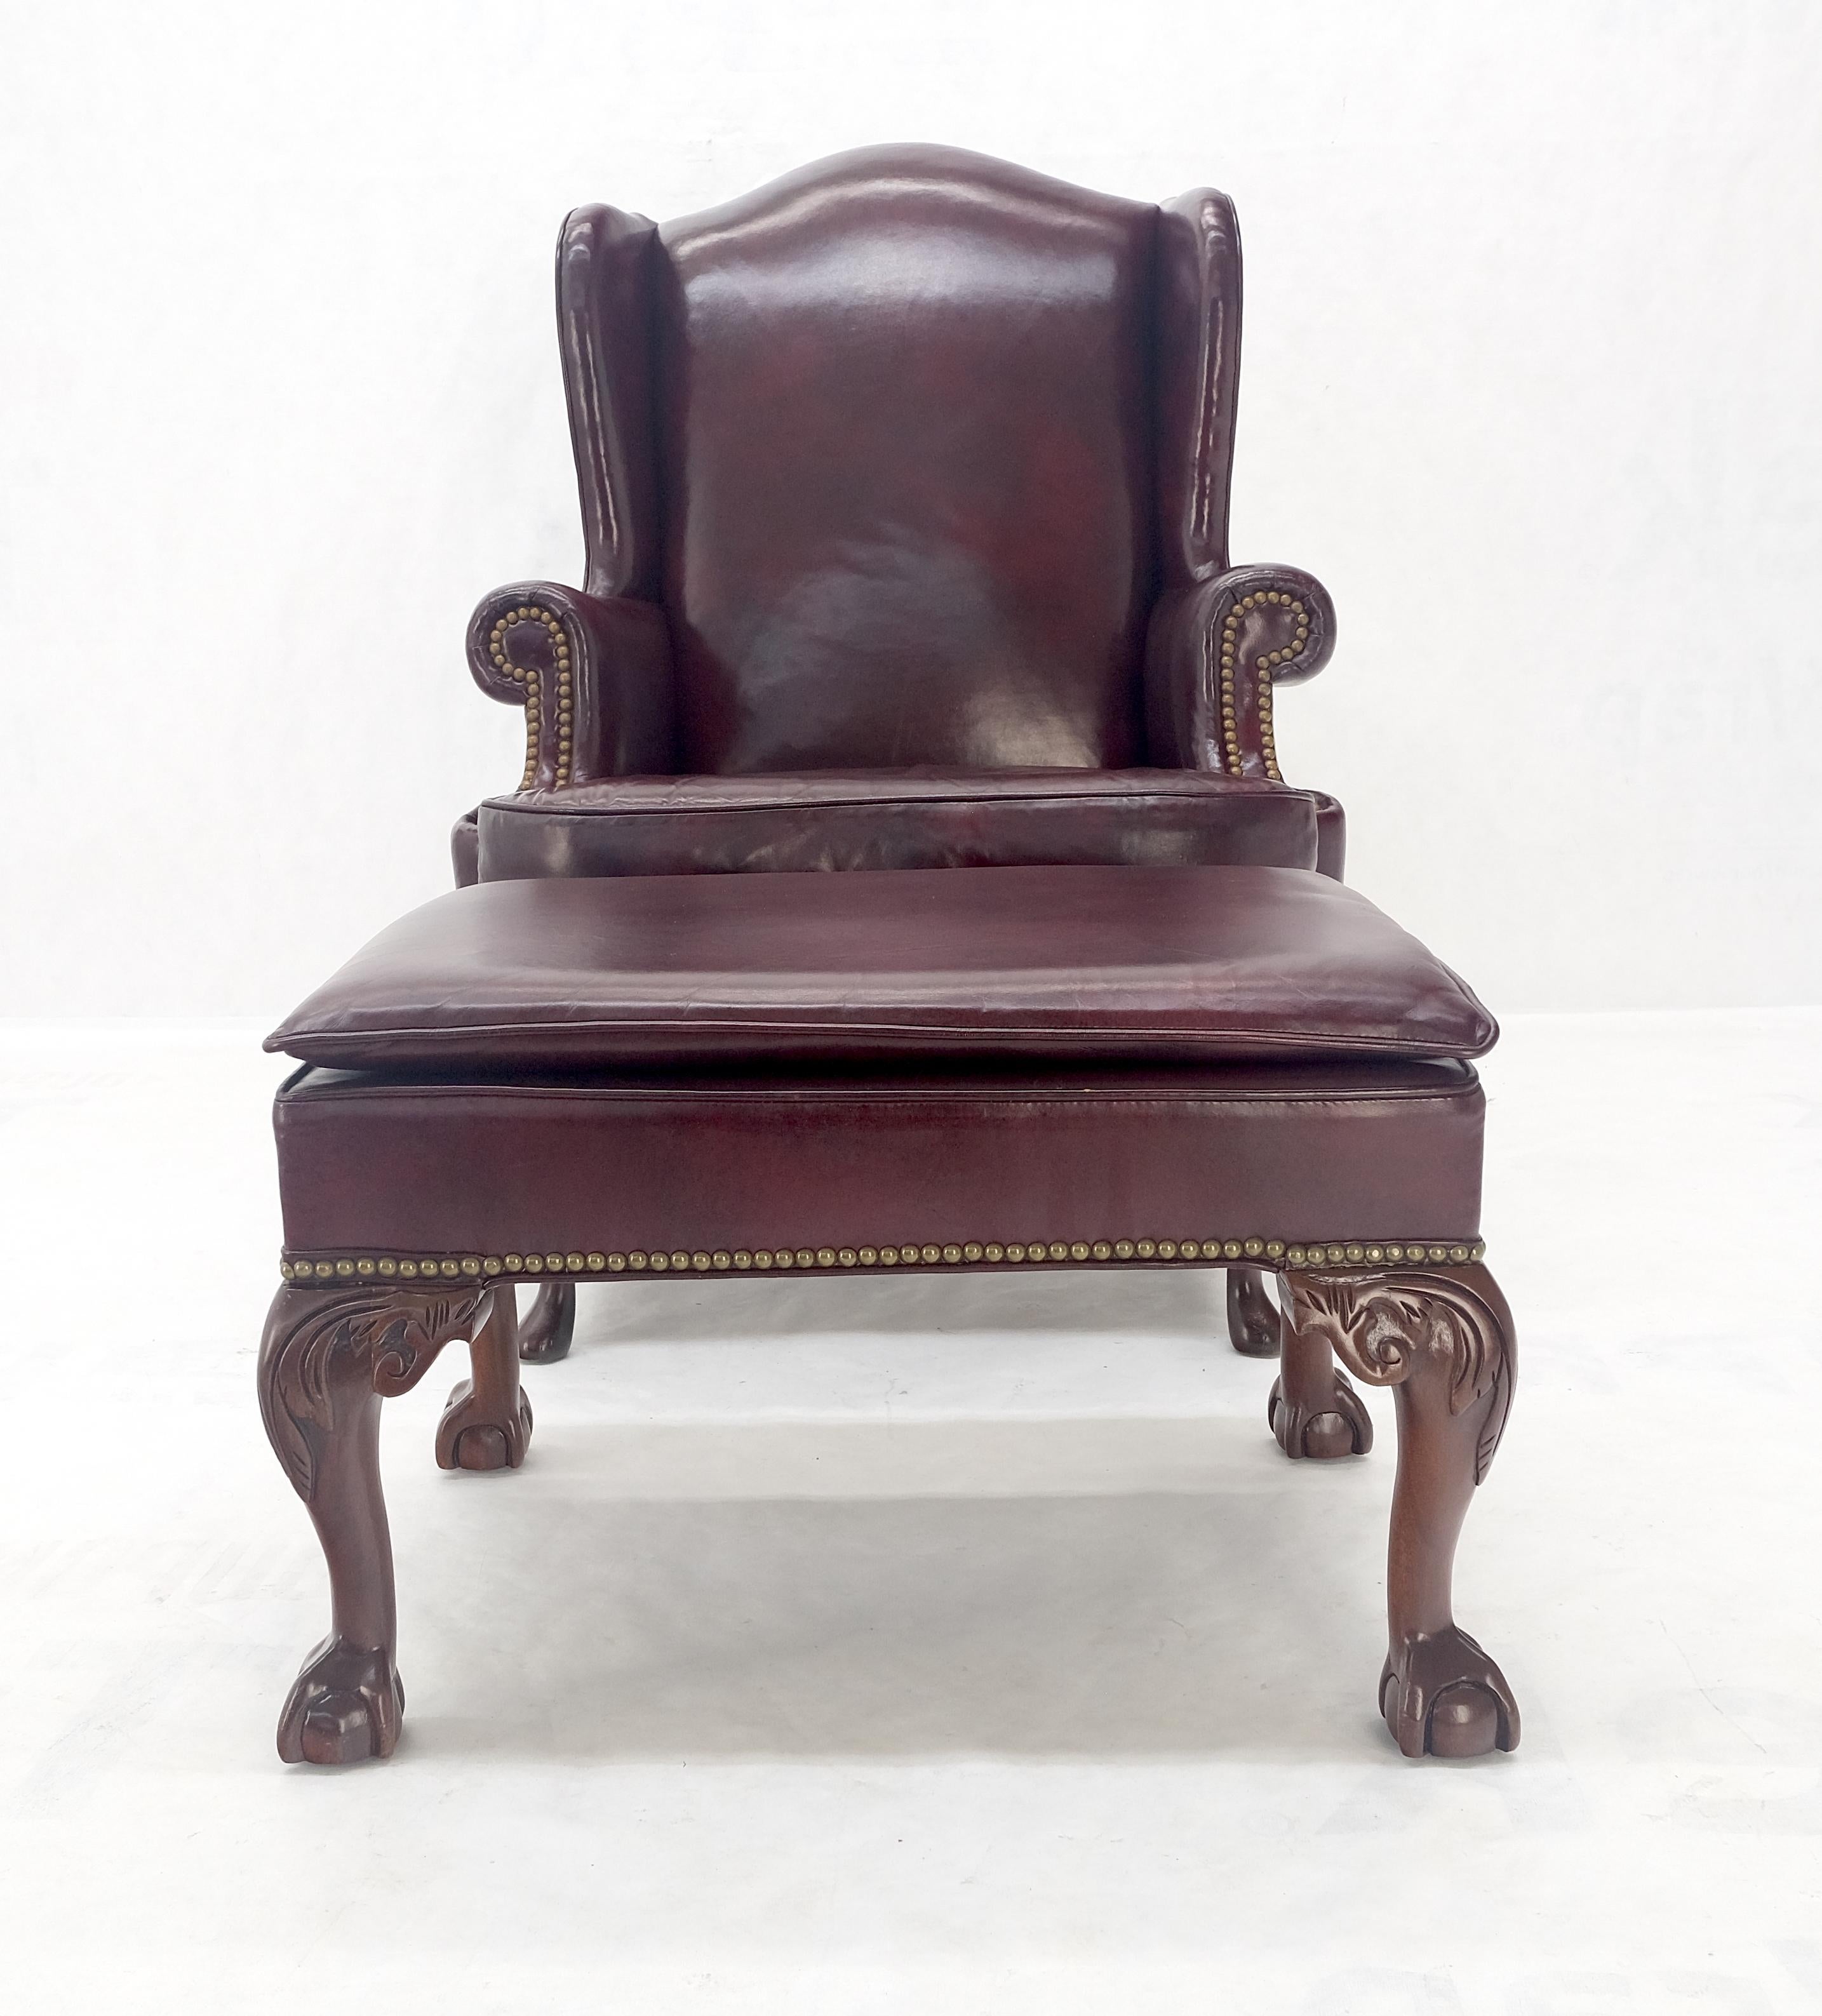 Kindel Burgundy Leather Upholstery Carved Mahogany Legs Wingback Chair & Ottoman For Sale 3